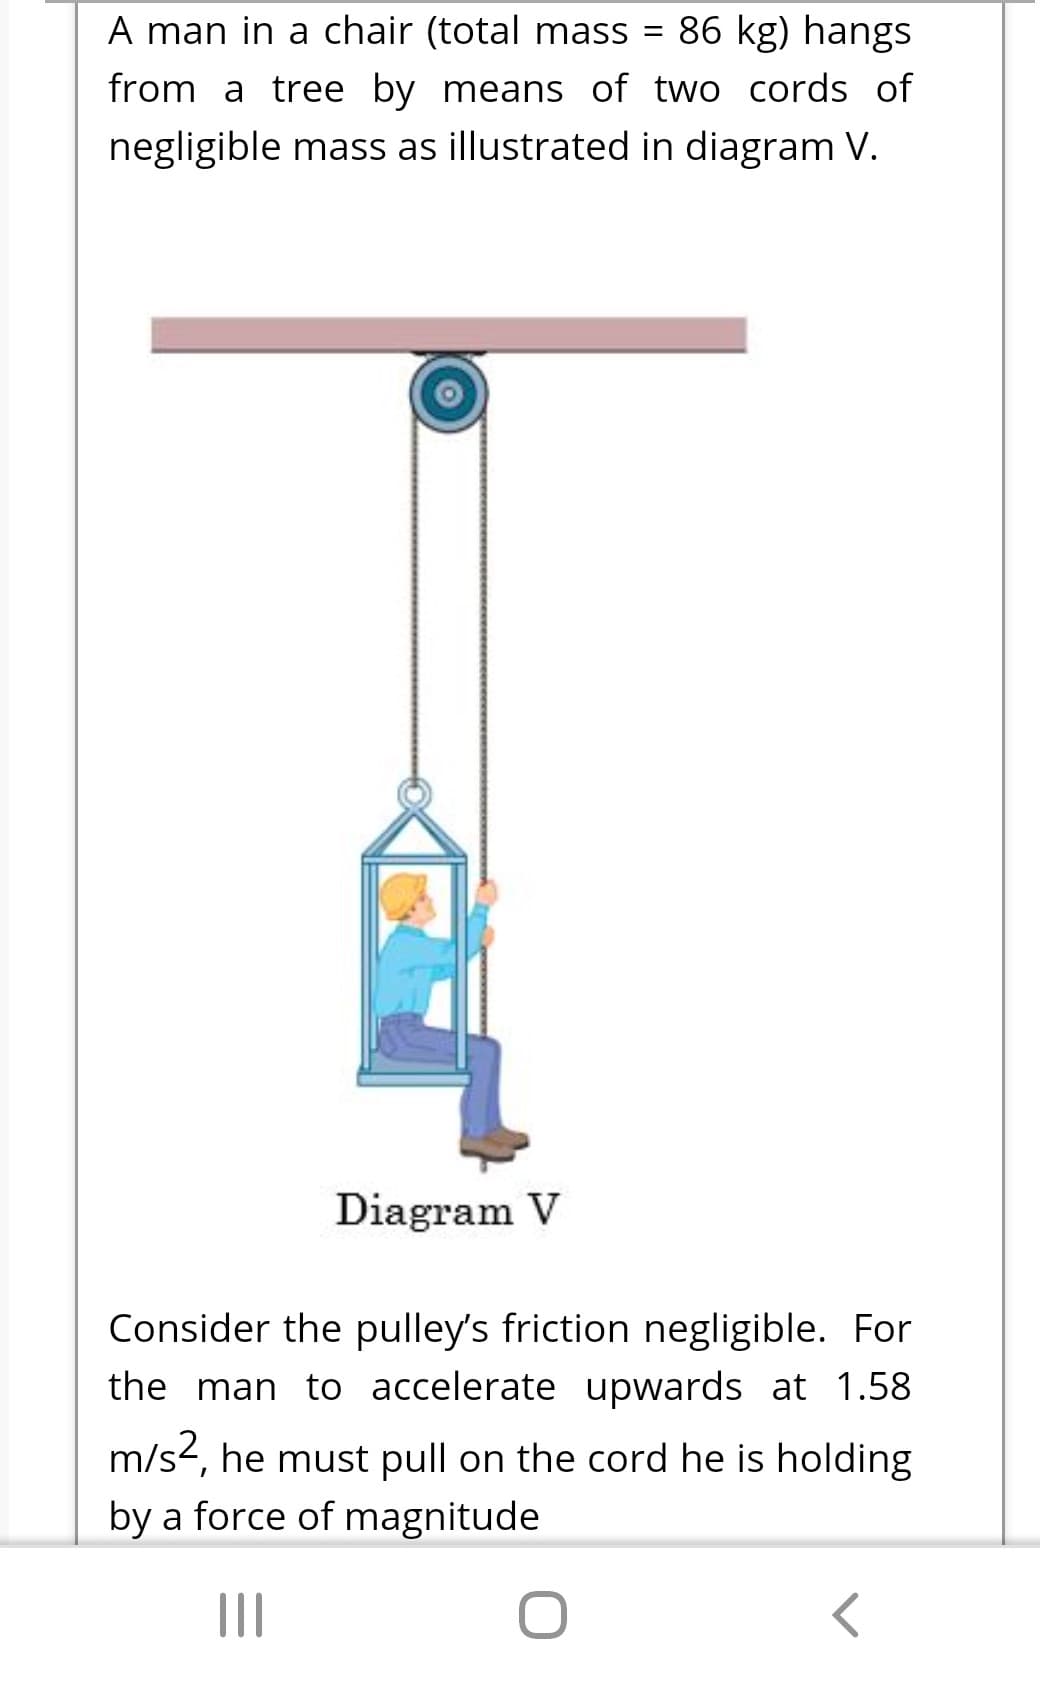 A man in a chair (total mass
86 kg) hangs
%3D
from a tree by means of two cords of
negligible mass as illustrated in diagram V.
Diagram V
Consider the pulley's friction negligible. For
the man to accelerate upwards at 1.58
m/s2, he must pull on the cord he is holding
by a force of magnitude
